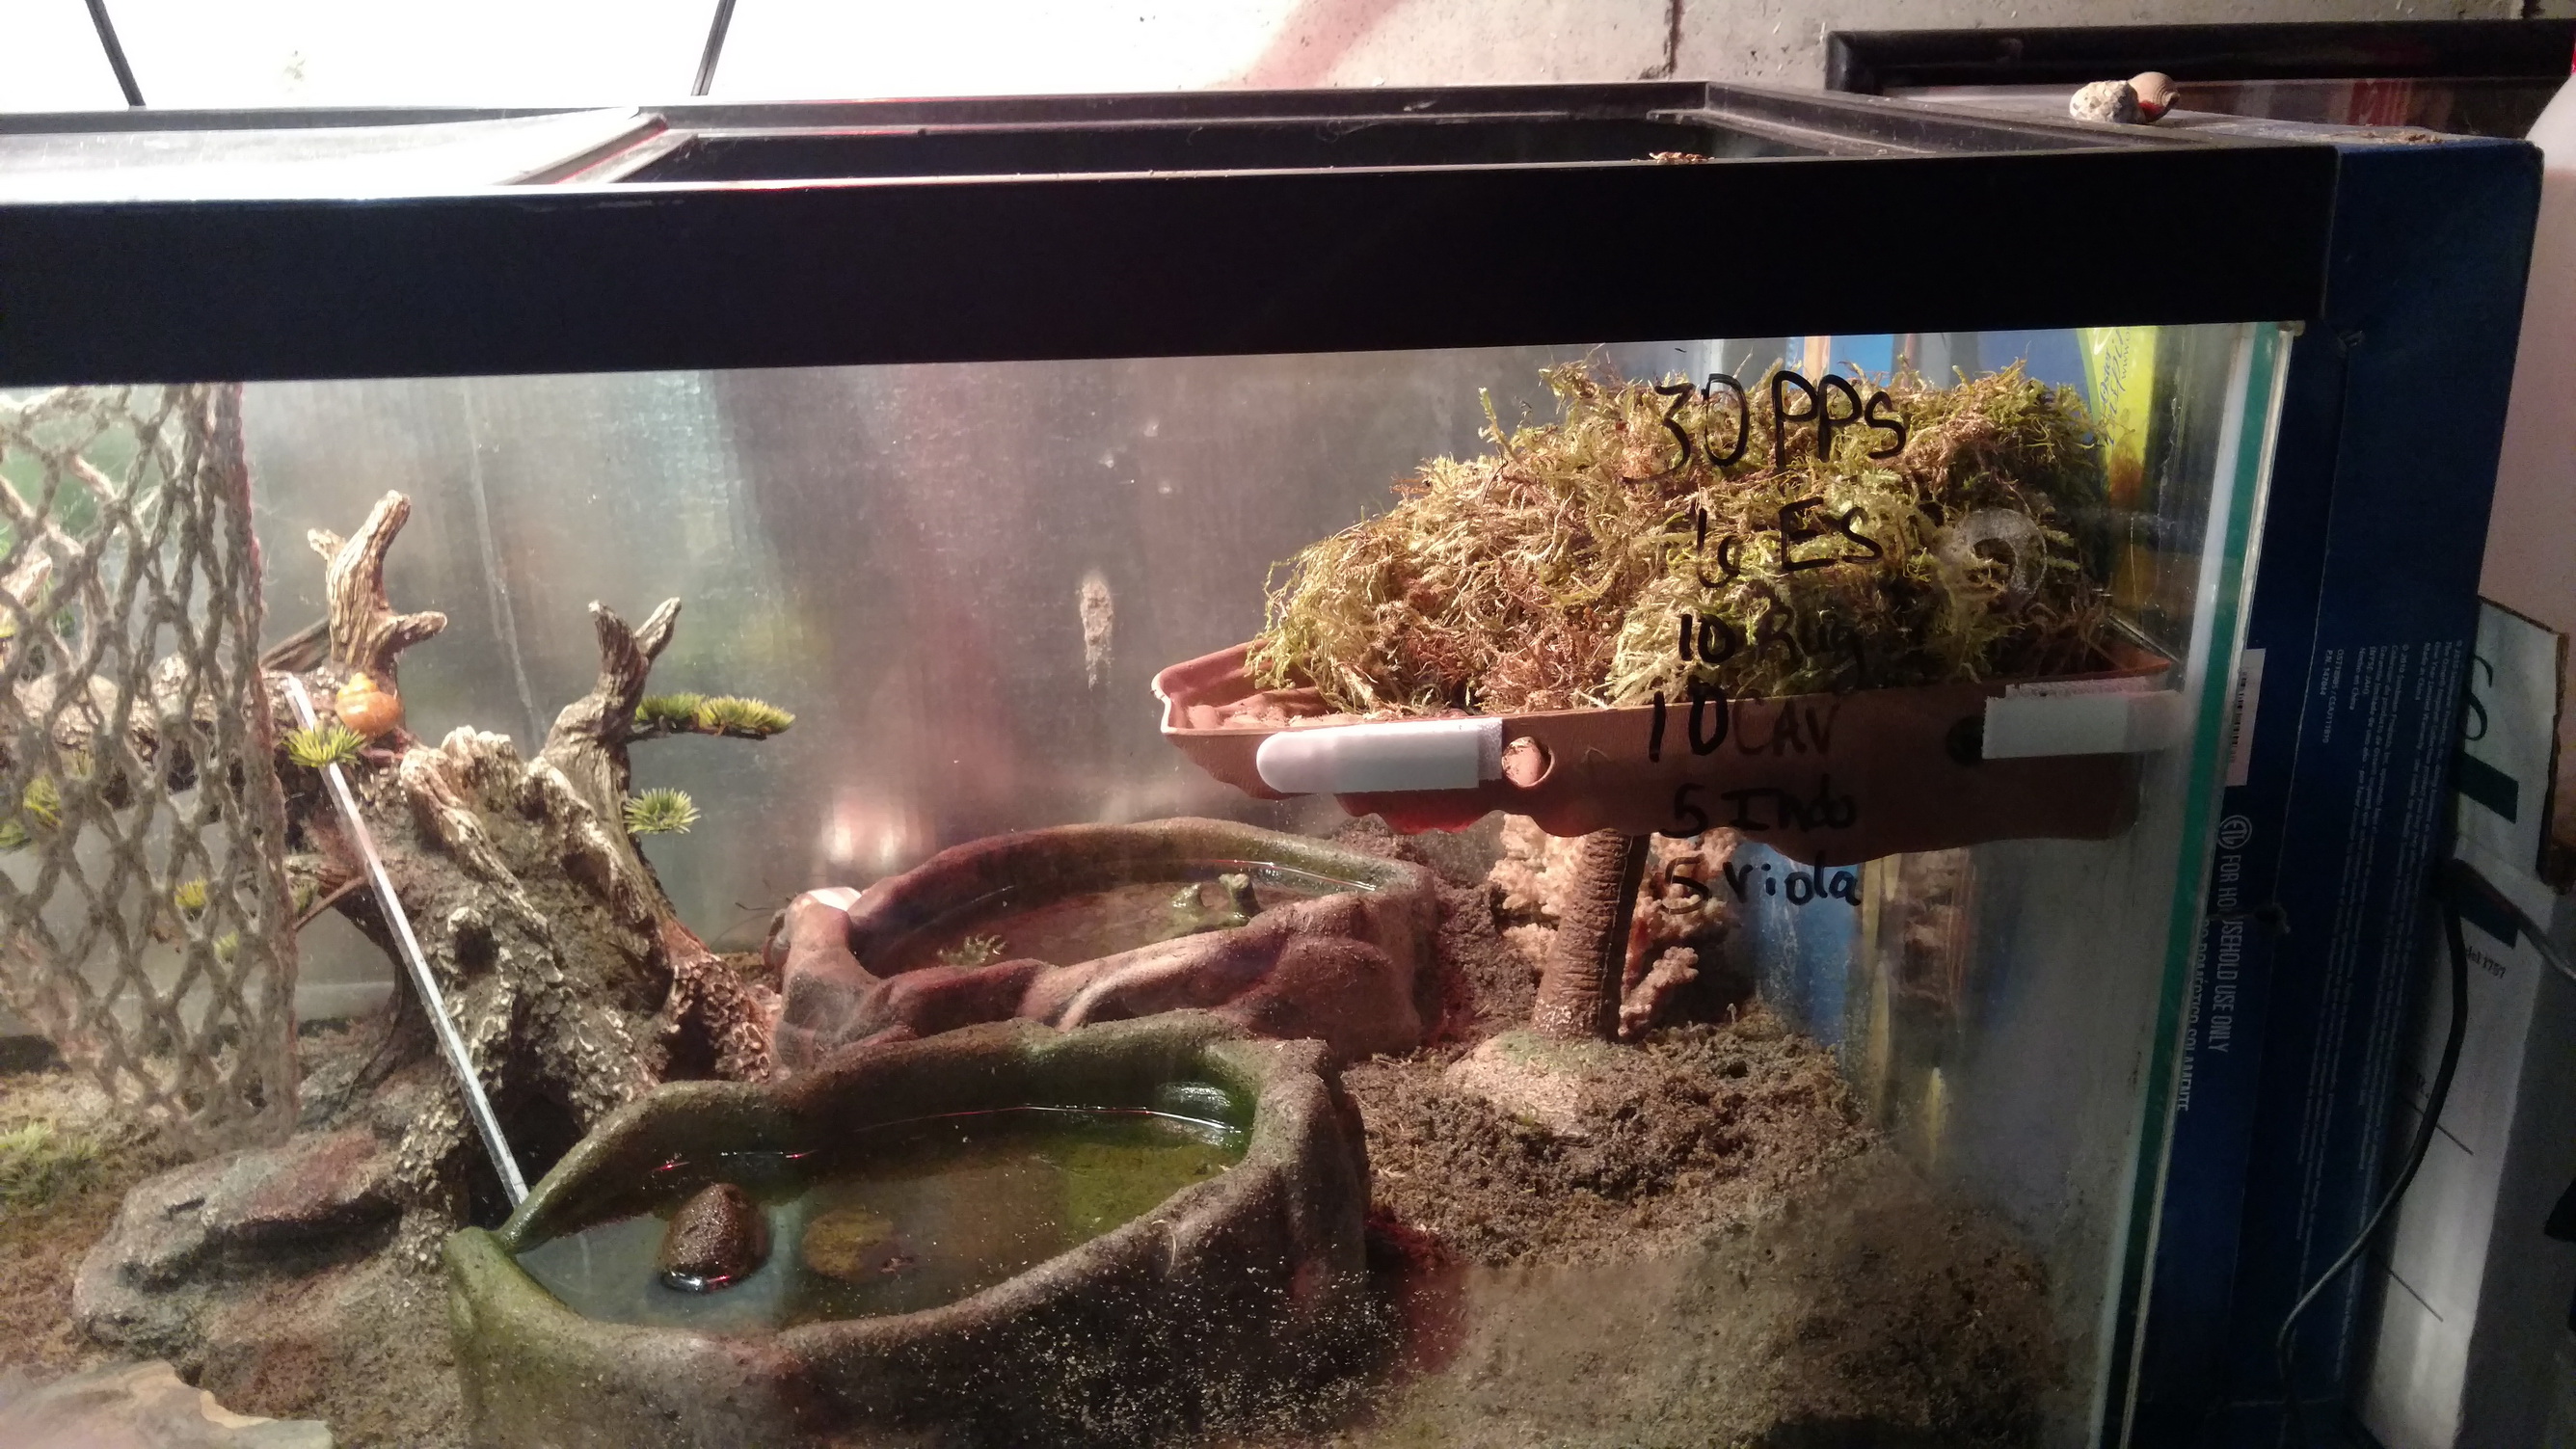 Turtle Dock mounted 3M Command strips with moss